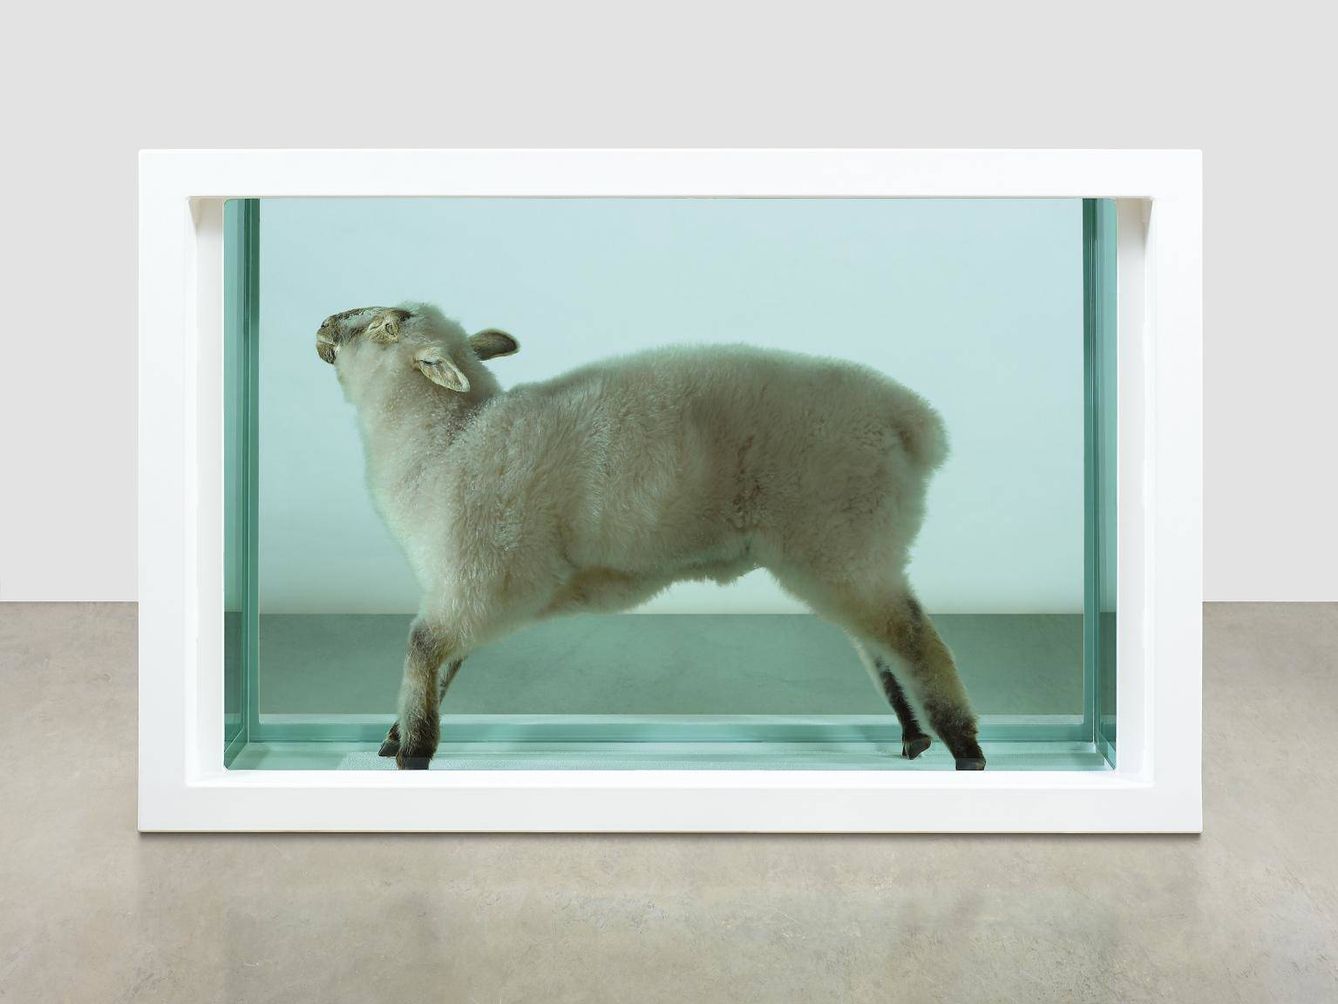 ‘Away from the Flock’, Damien Hirst,  1994. Tate Modern.